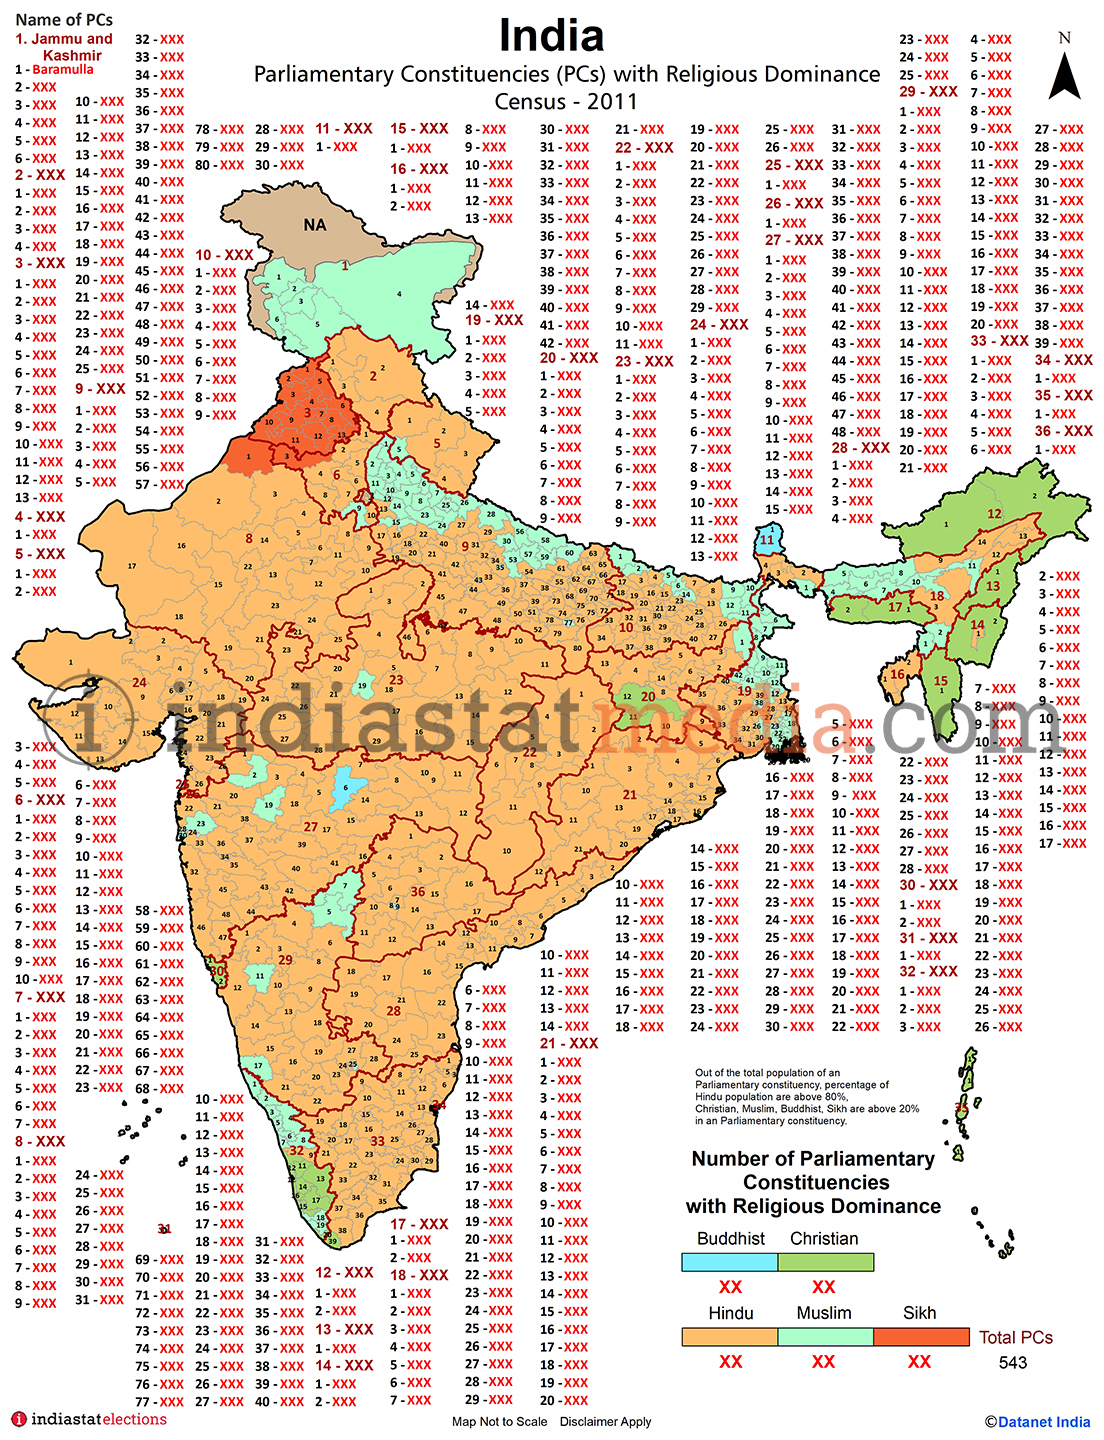 Parliamentary Constituencies with Religious Dominance in India - Census 2011